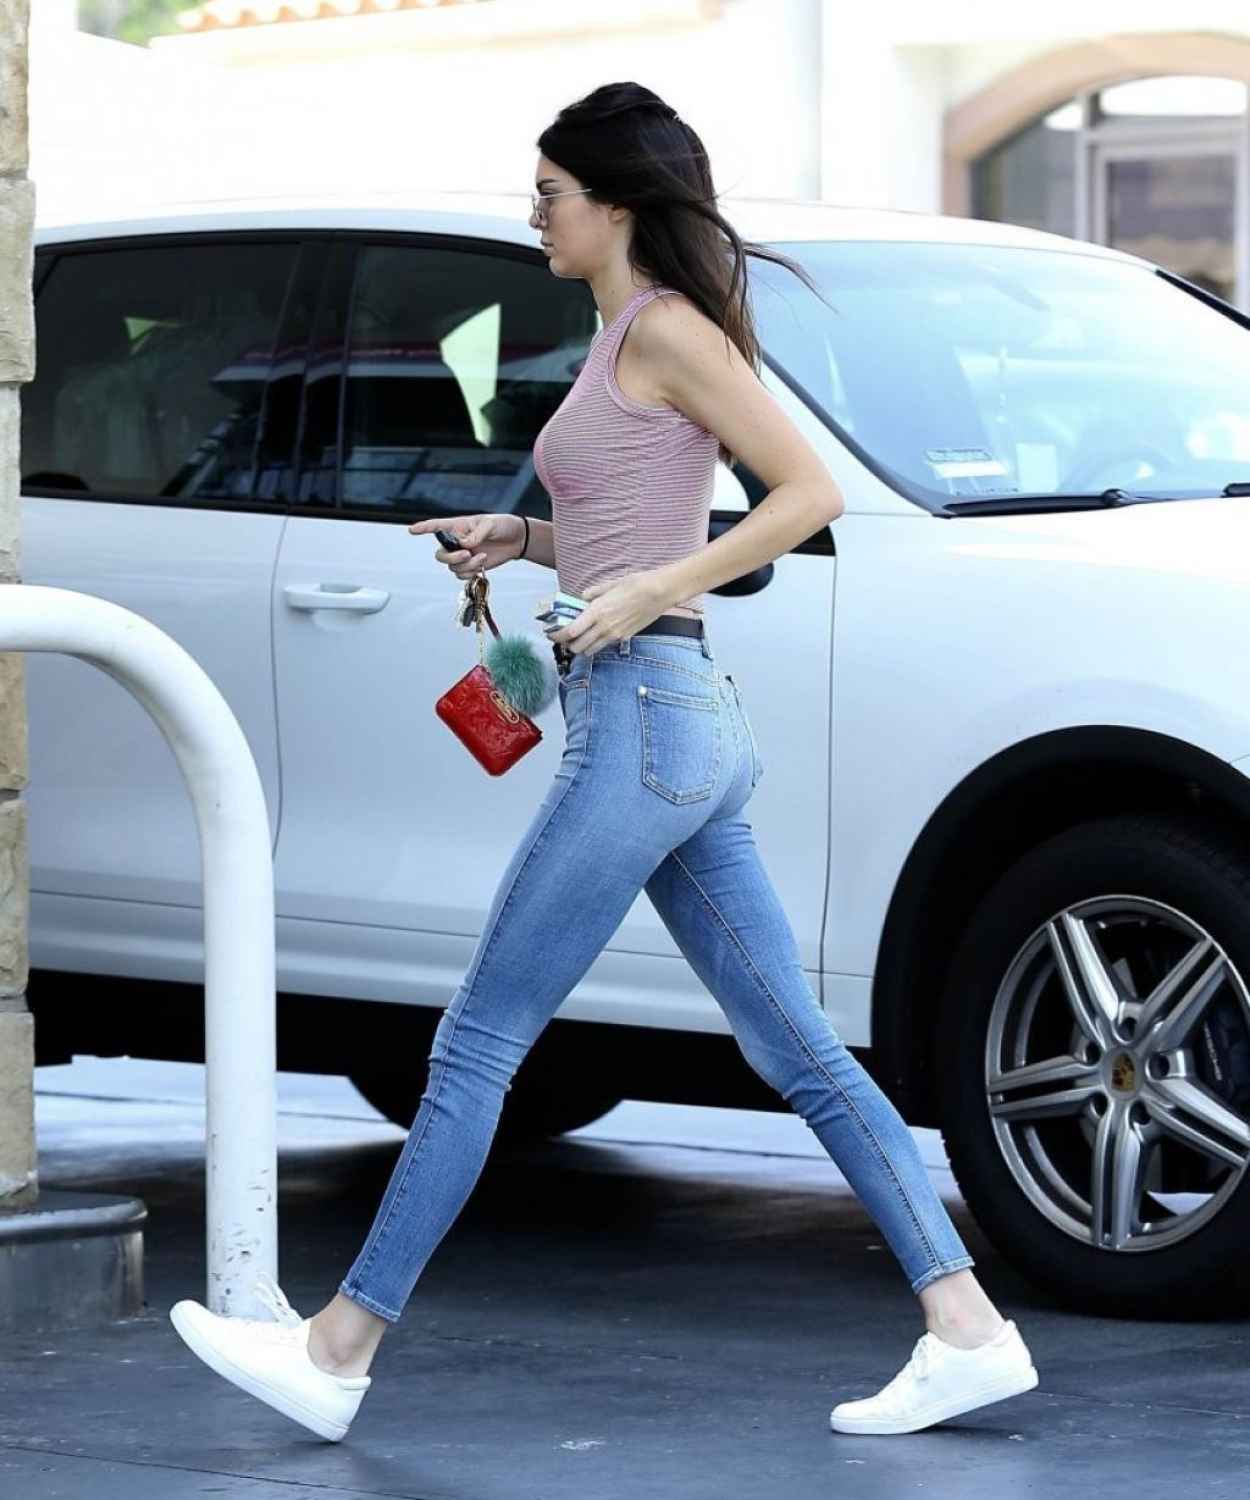 Kendall Jenner Hot In Tight Jeans At A Gas Station In Calabasas July 2015